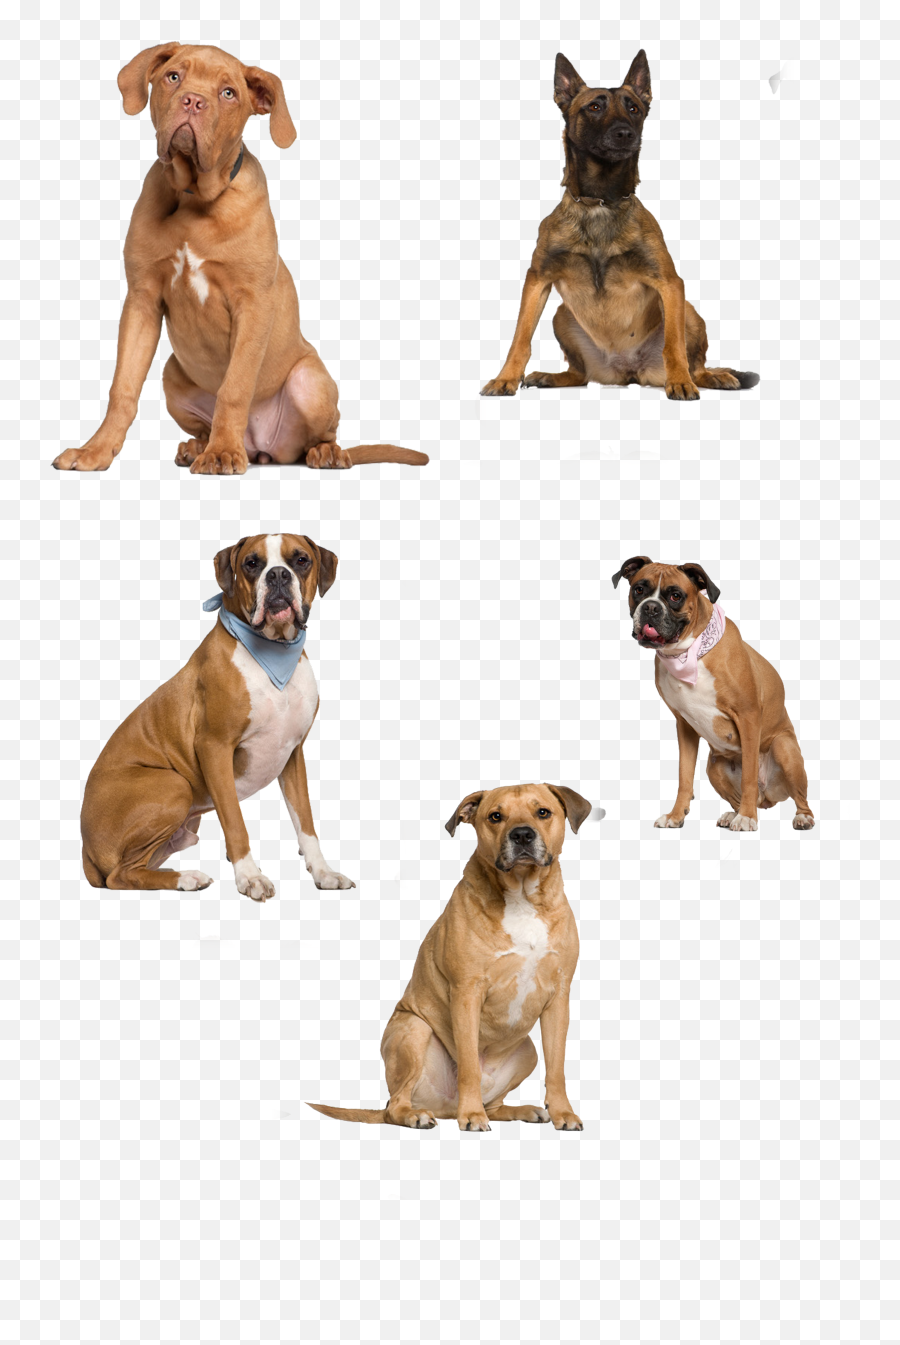 Dog Icon - Dogs Png Download 28944093 Free Transparent Dogo De Burdeos 5 Meses,Dog Icon Png